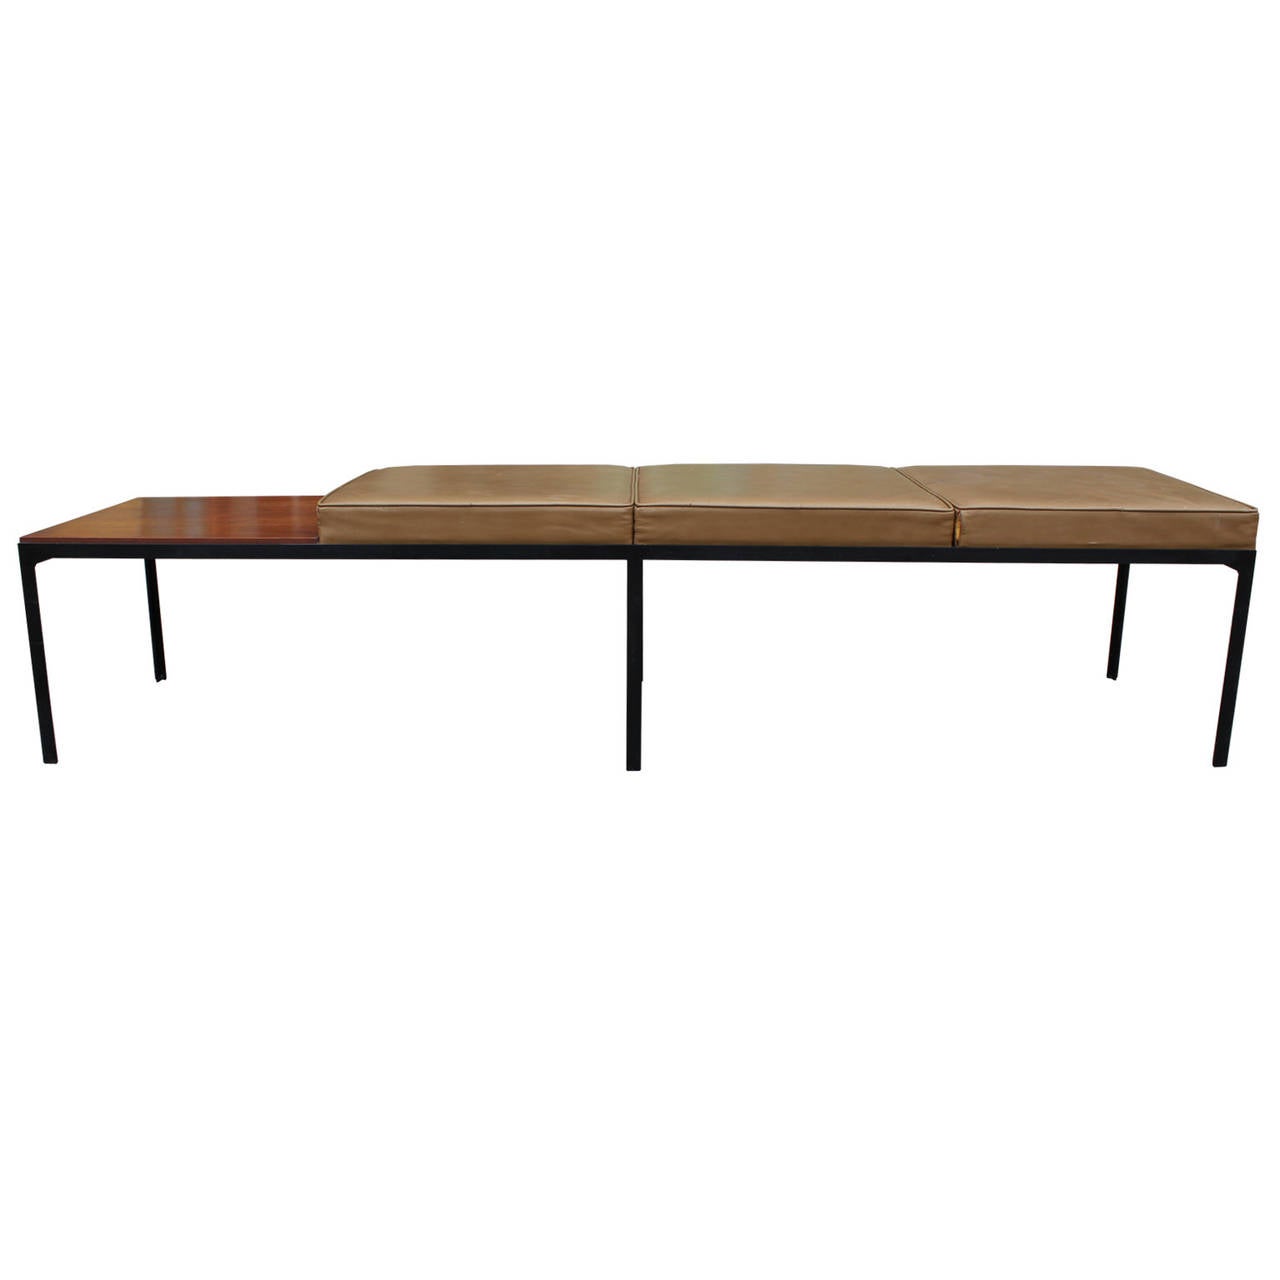 American Florence Knoll T Angle Leather and Walnut 3 Seat Bench